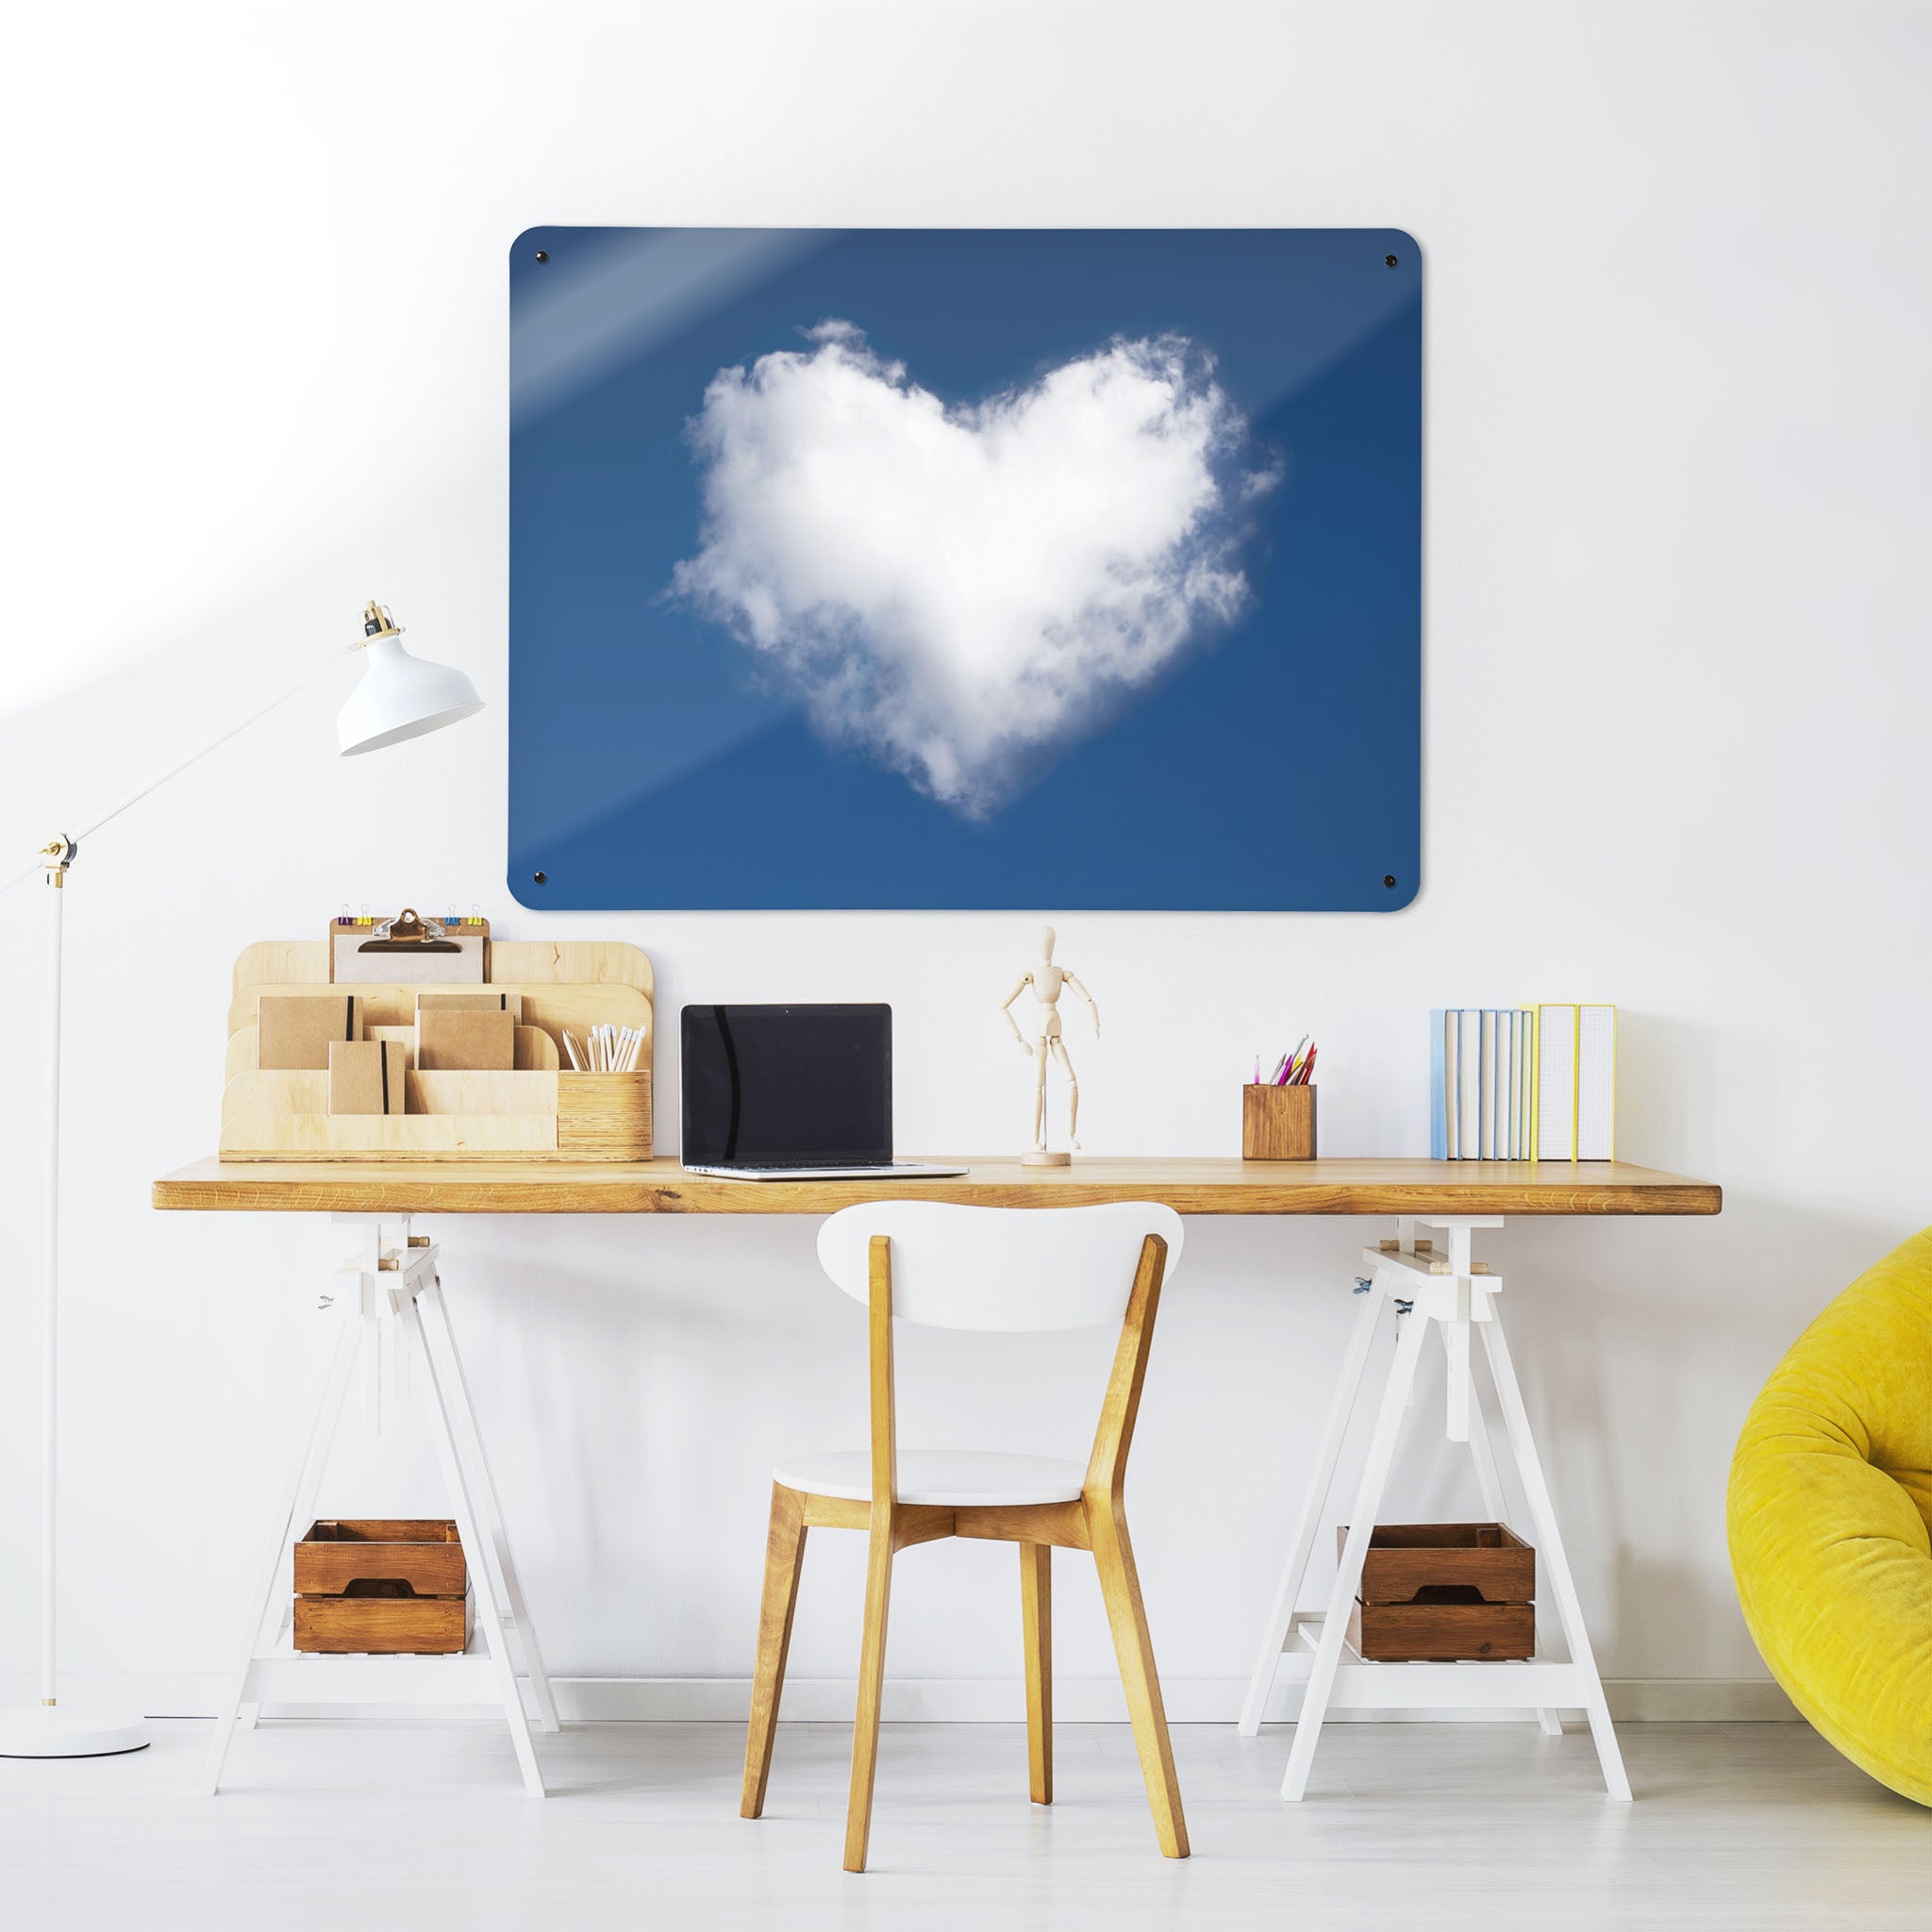 A desk in a workspace setting in a white interior with a magnetic metal wall art panel showing an image of a white cloud heart in a blue sky